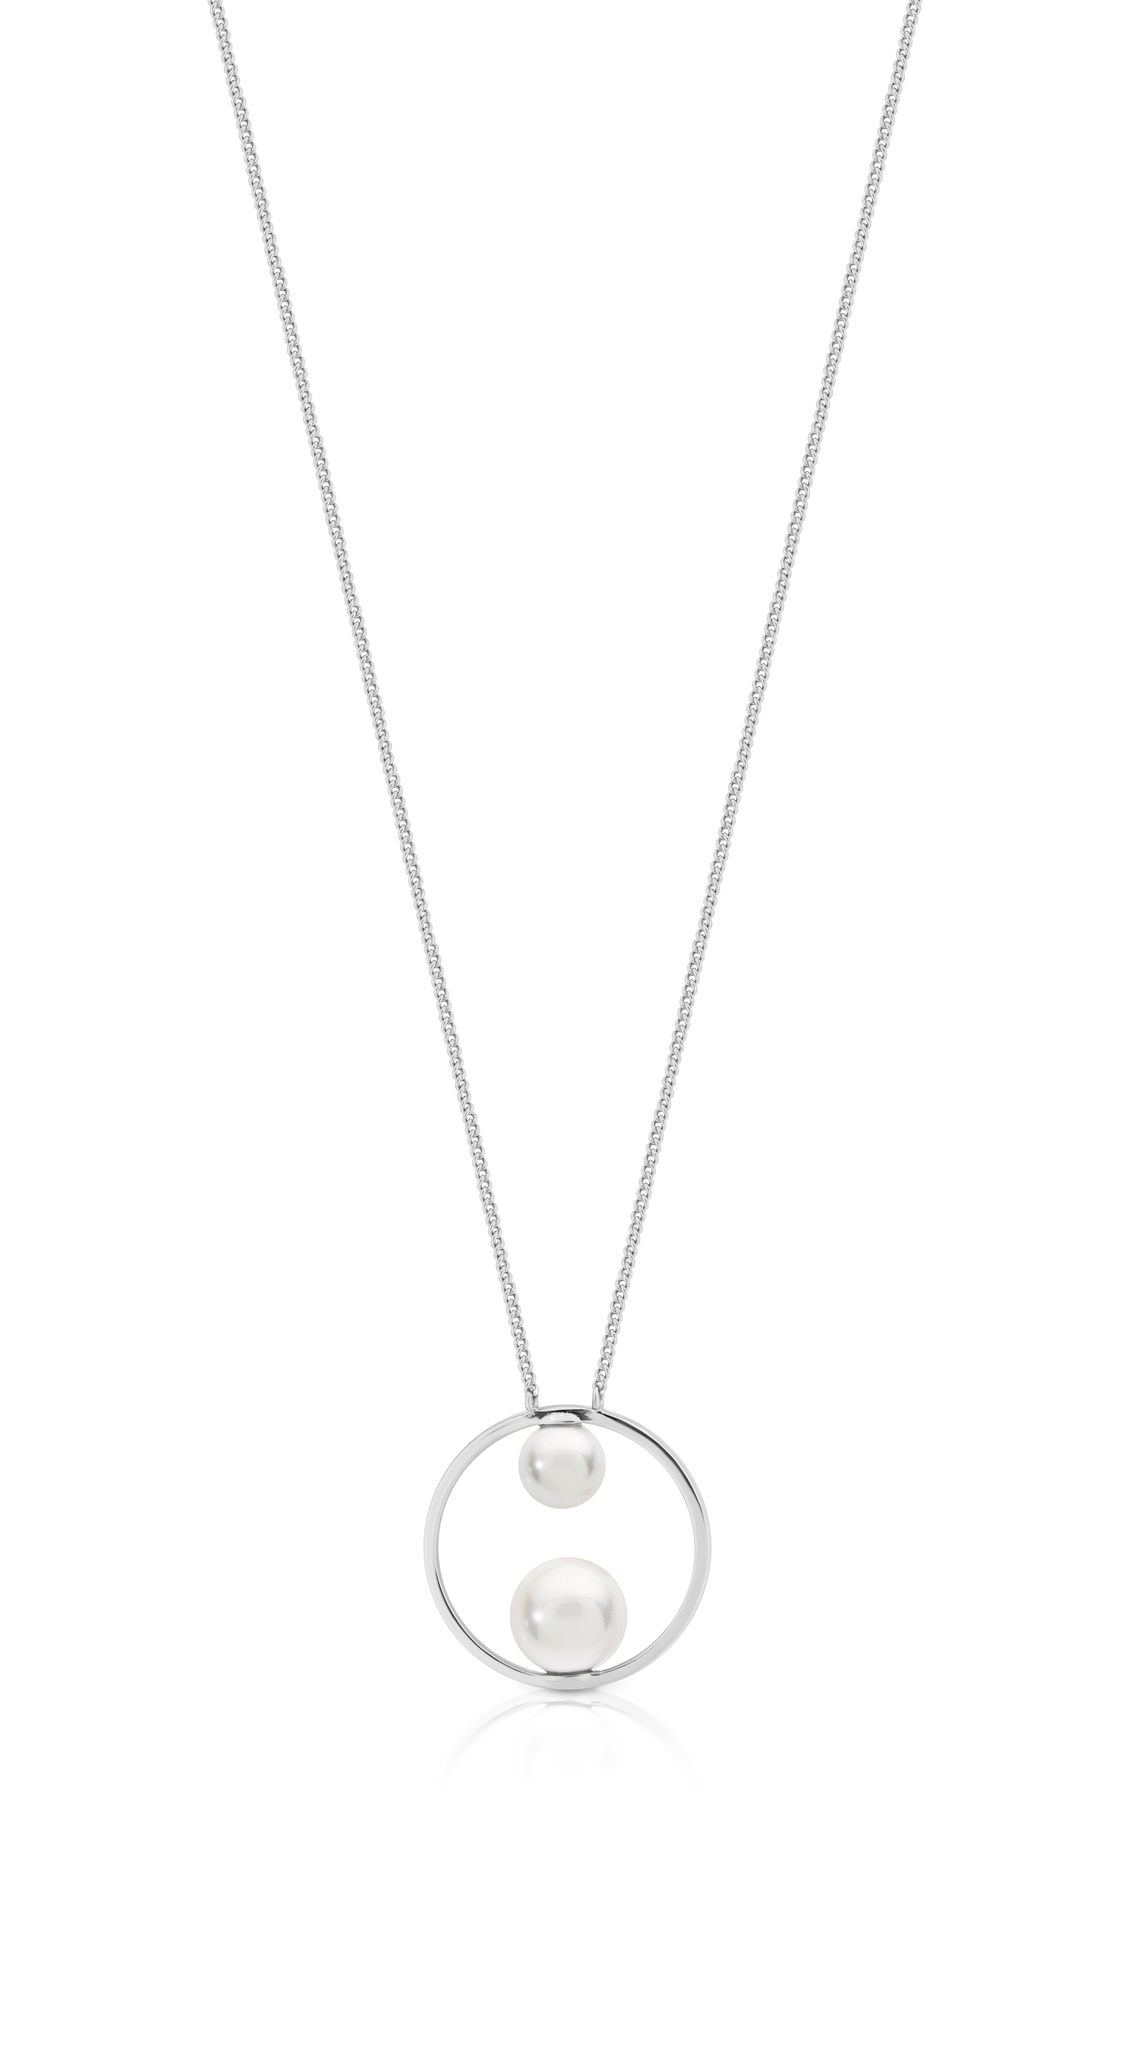 Romi Pendant - Pearl Circle  - Rose Gold Plated/Silver